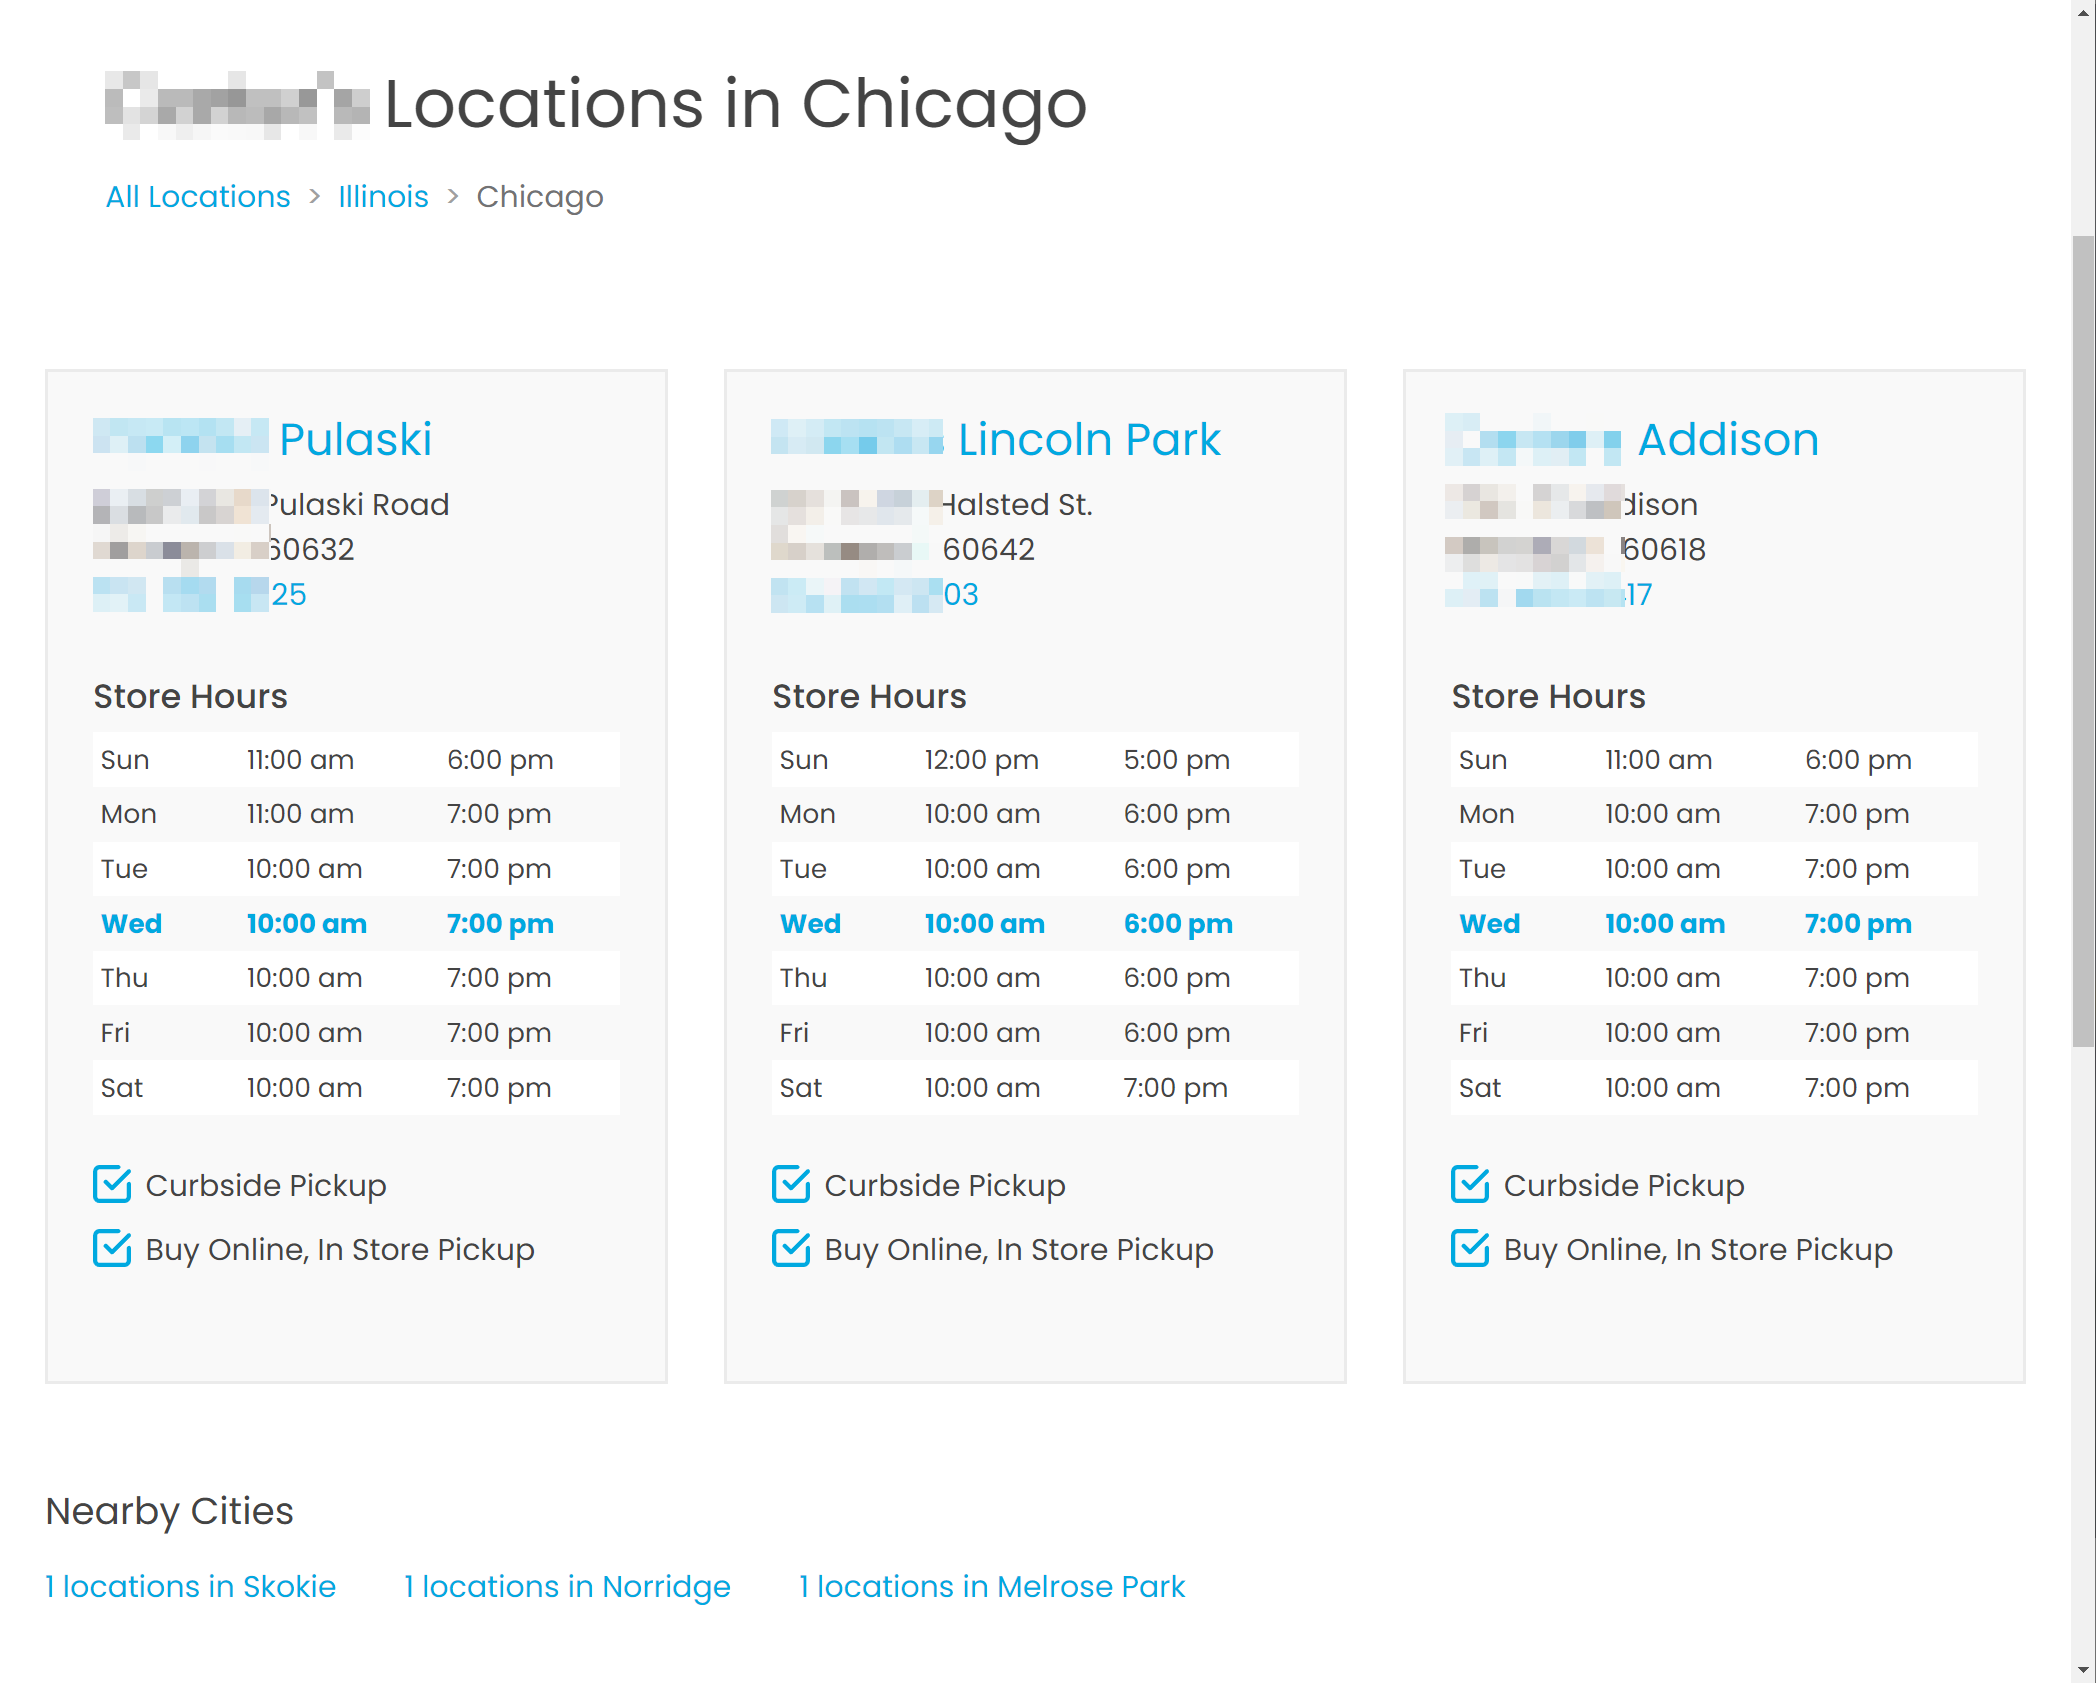 Nearby cities for location pages